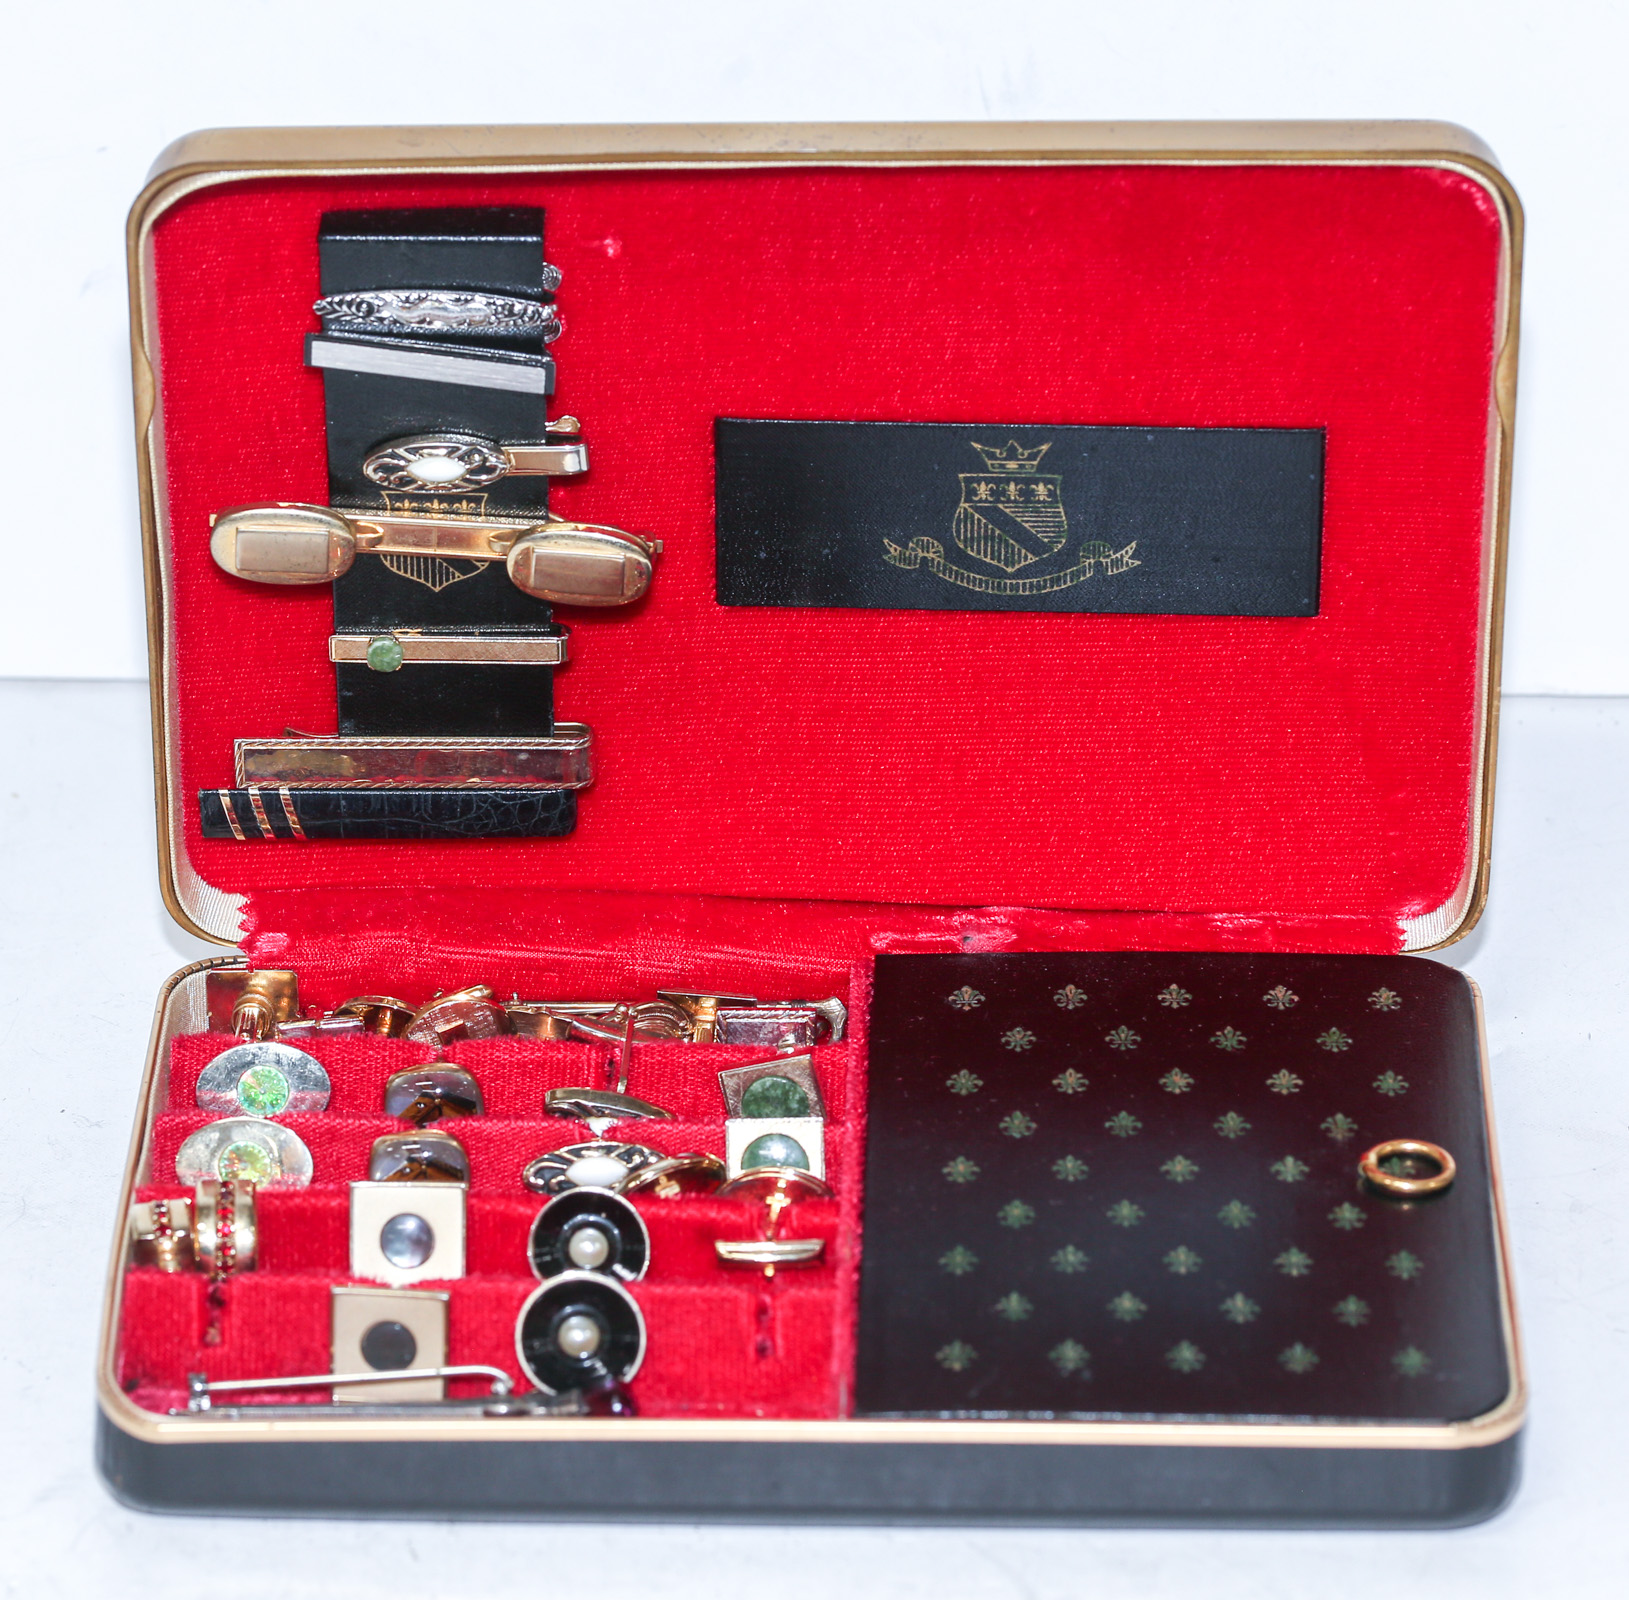 A JEWELRY BOX FILLED WITH CUFFLINKS 369c11